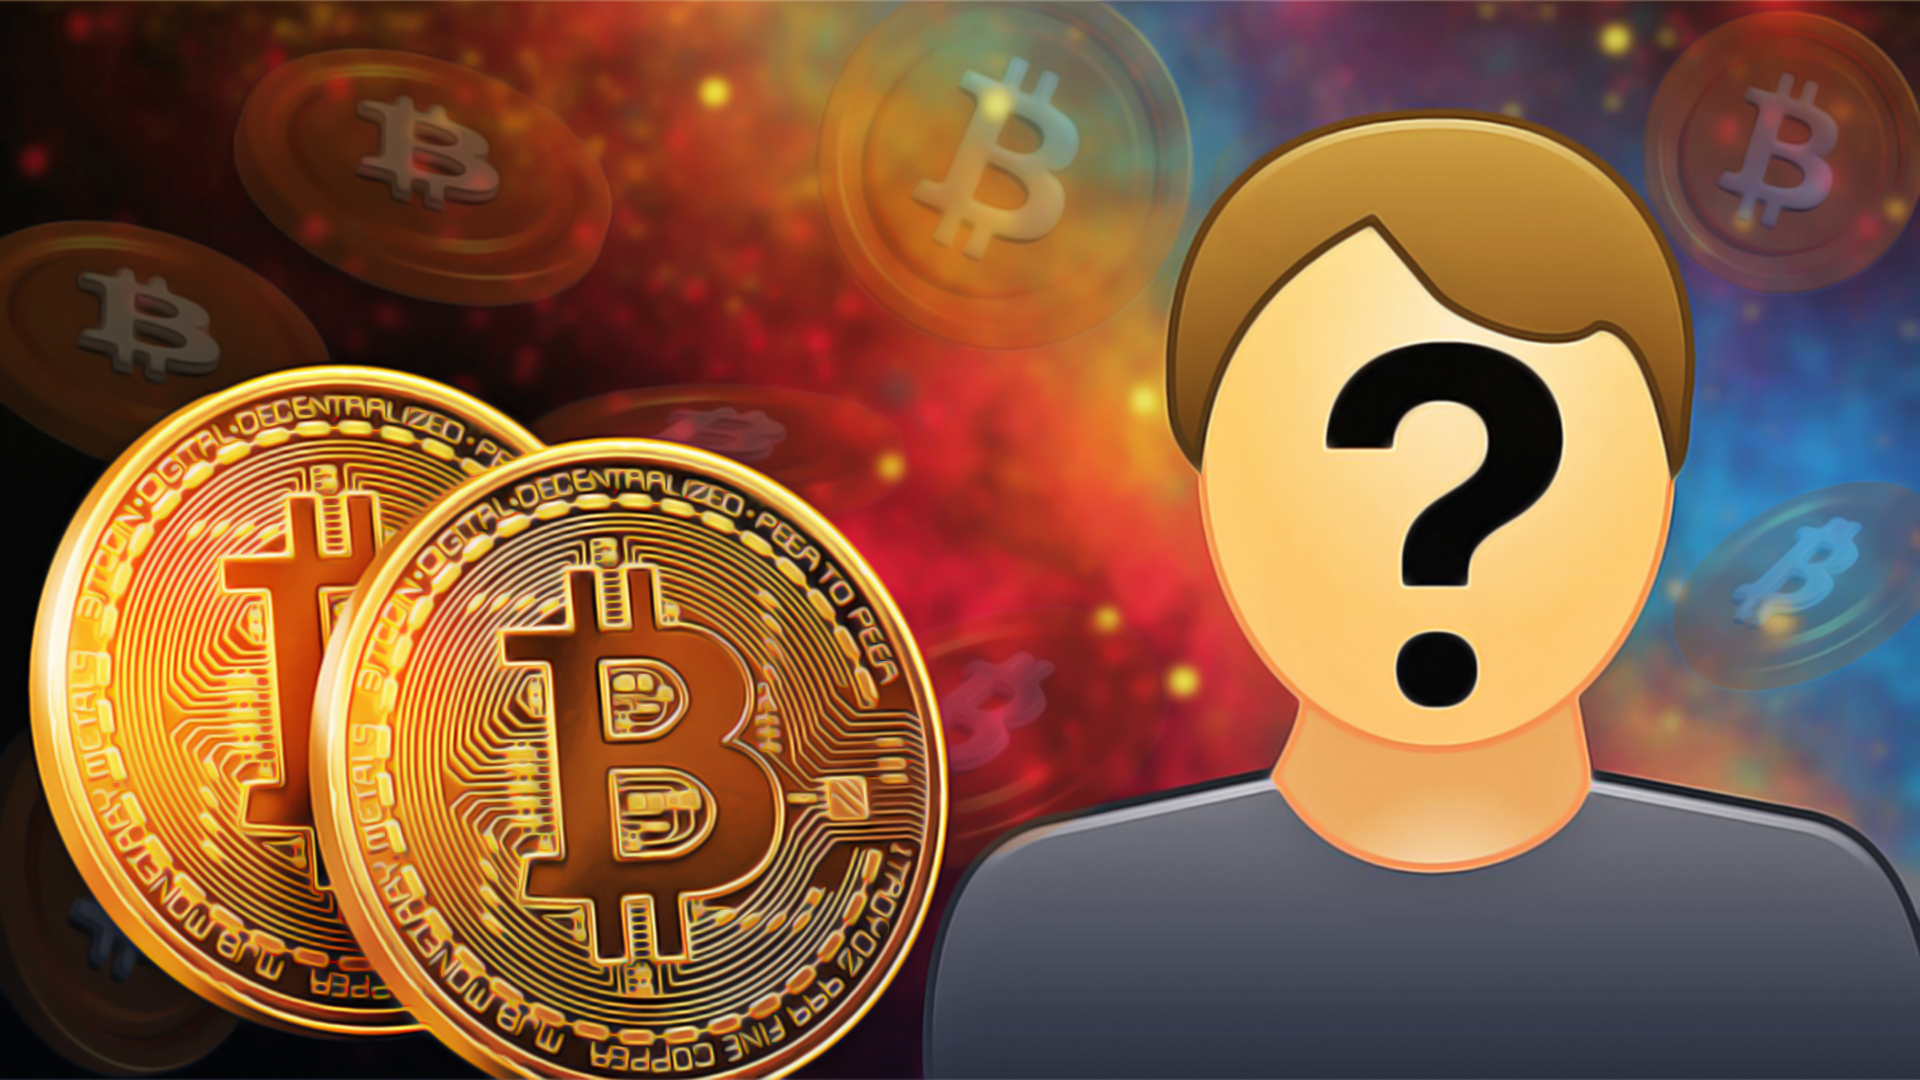 Who are the Founders of Bitcoin? What Makes Bitcoin Unique?